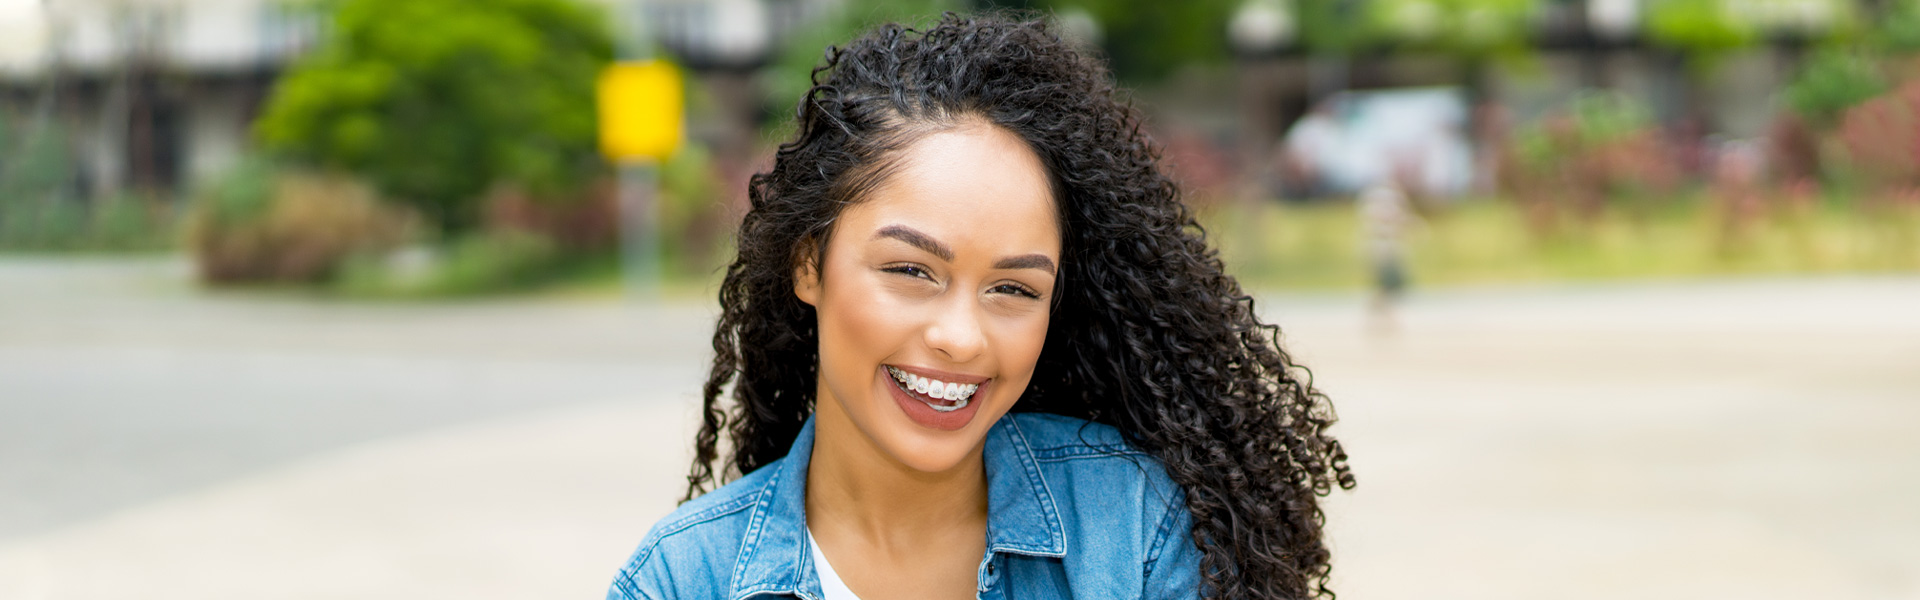 How Orthodontic Treatment Can Improve your Smile